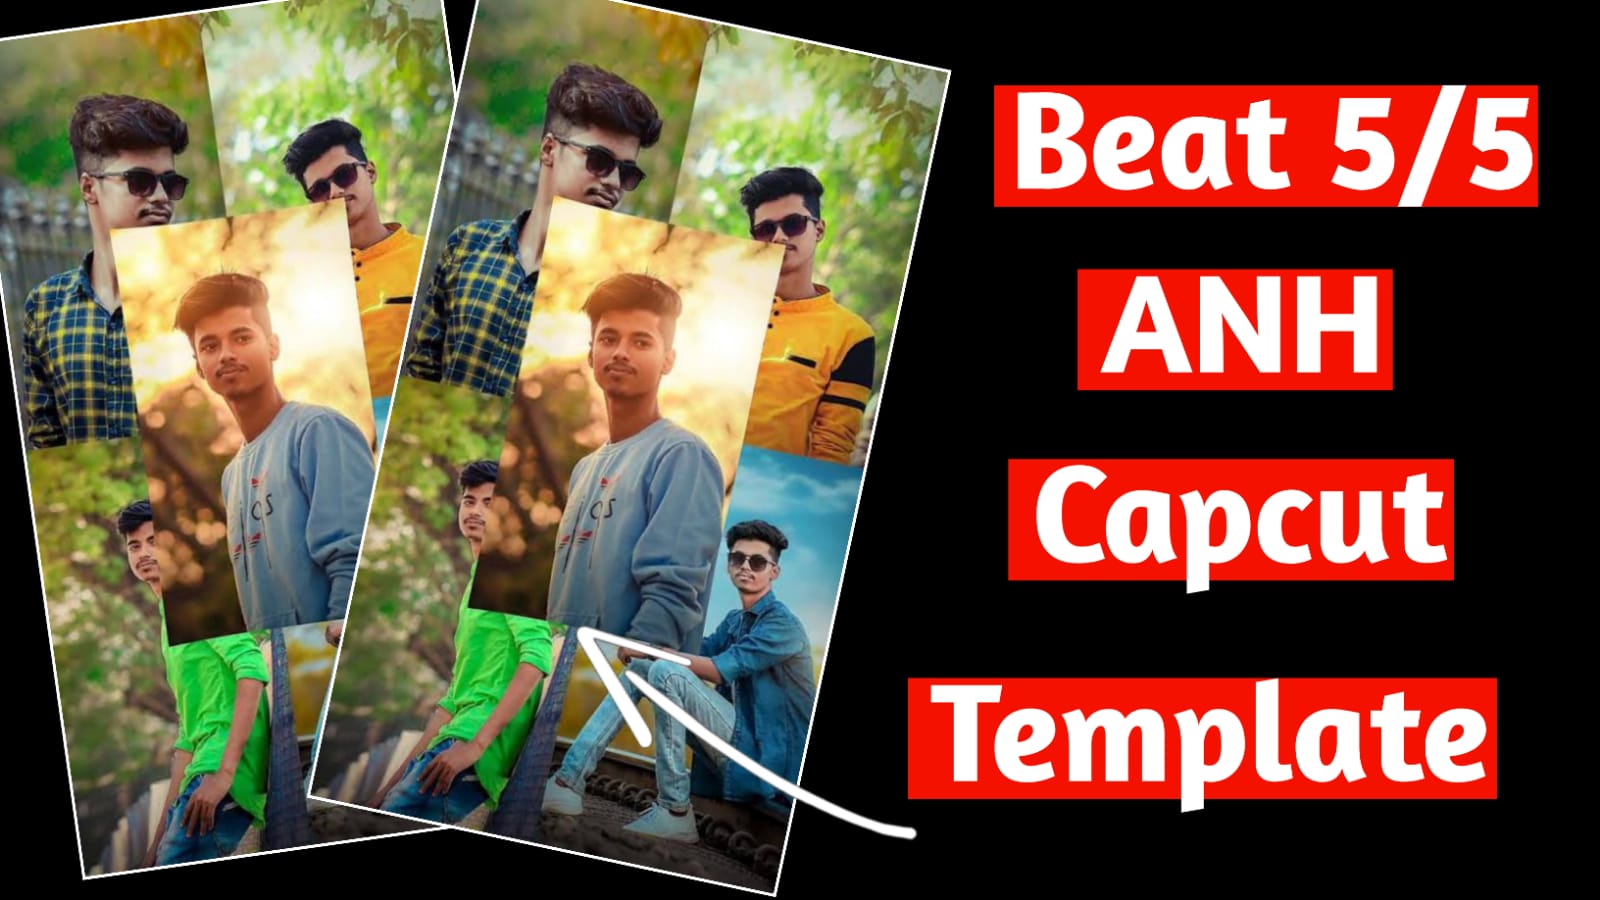 beat 5/5 anh vn template link 2023